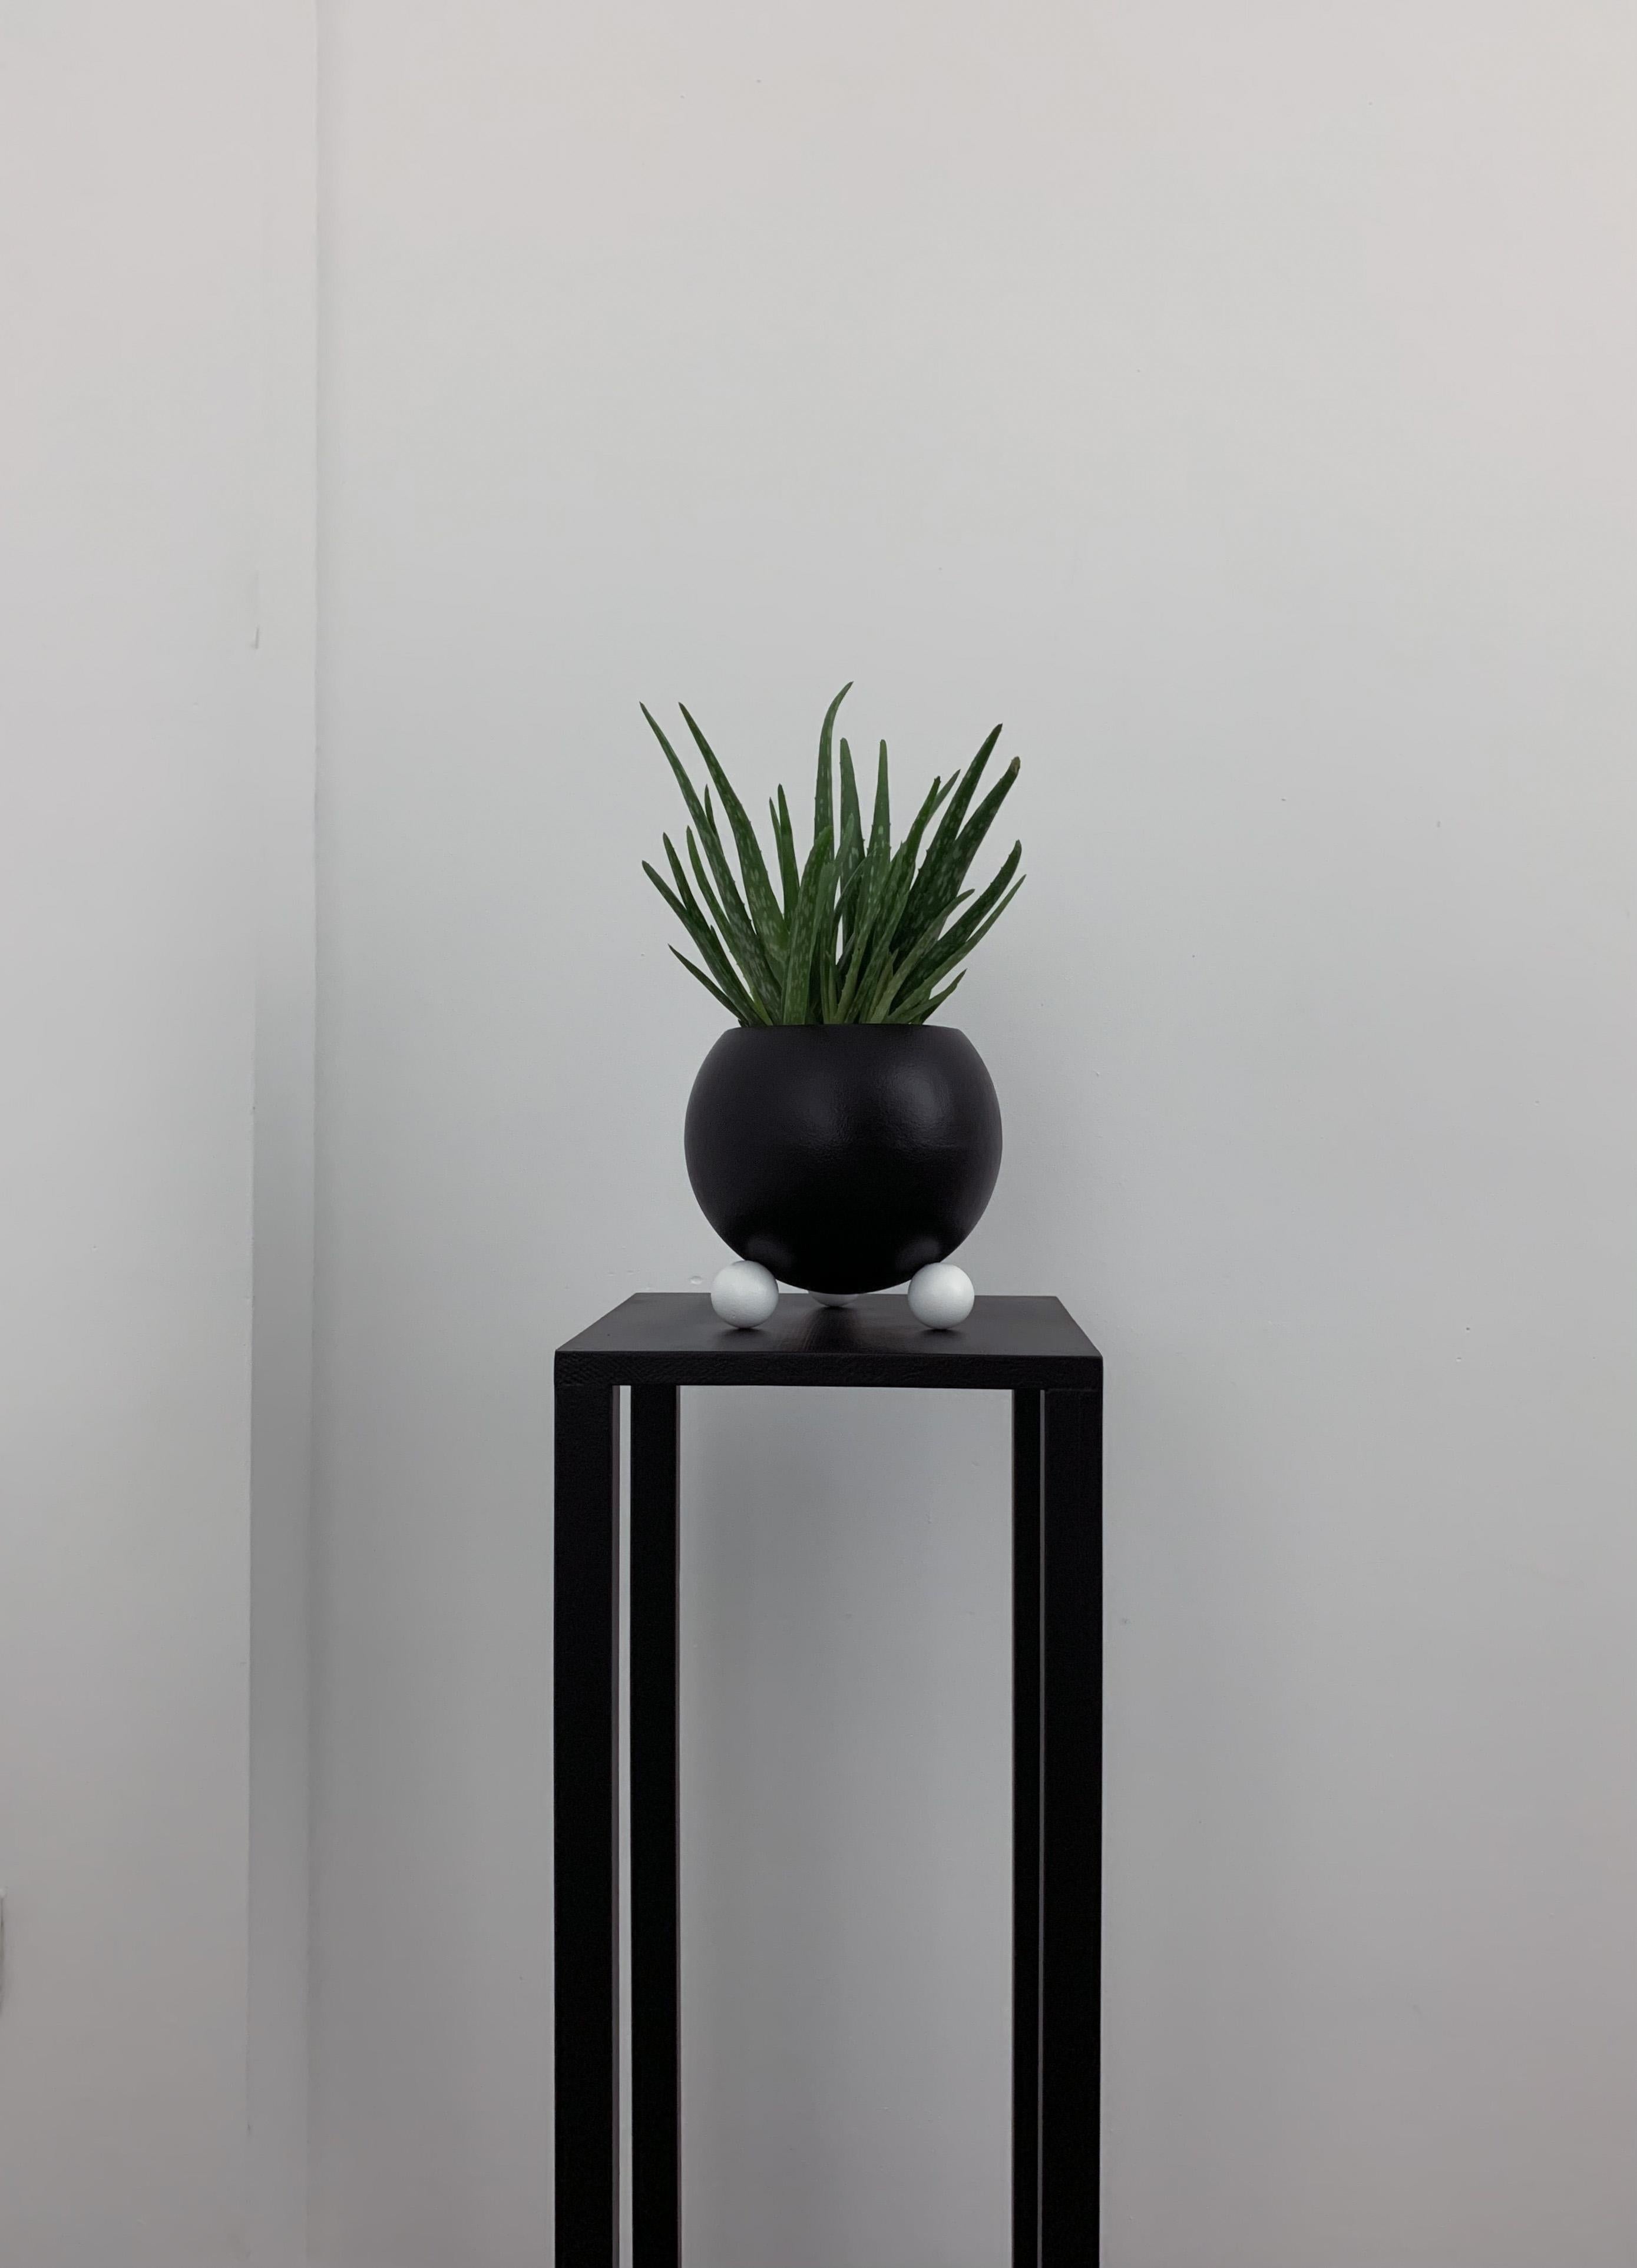 Arty Plant Pot Sculpture Black and White - Gray Abstract Sculpture by Rostyslav Kozhman